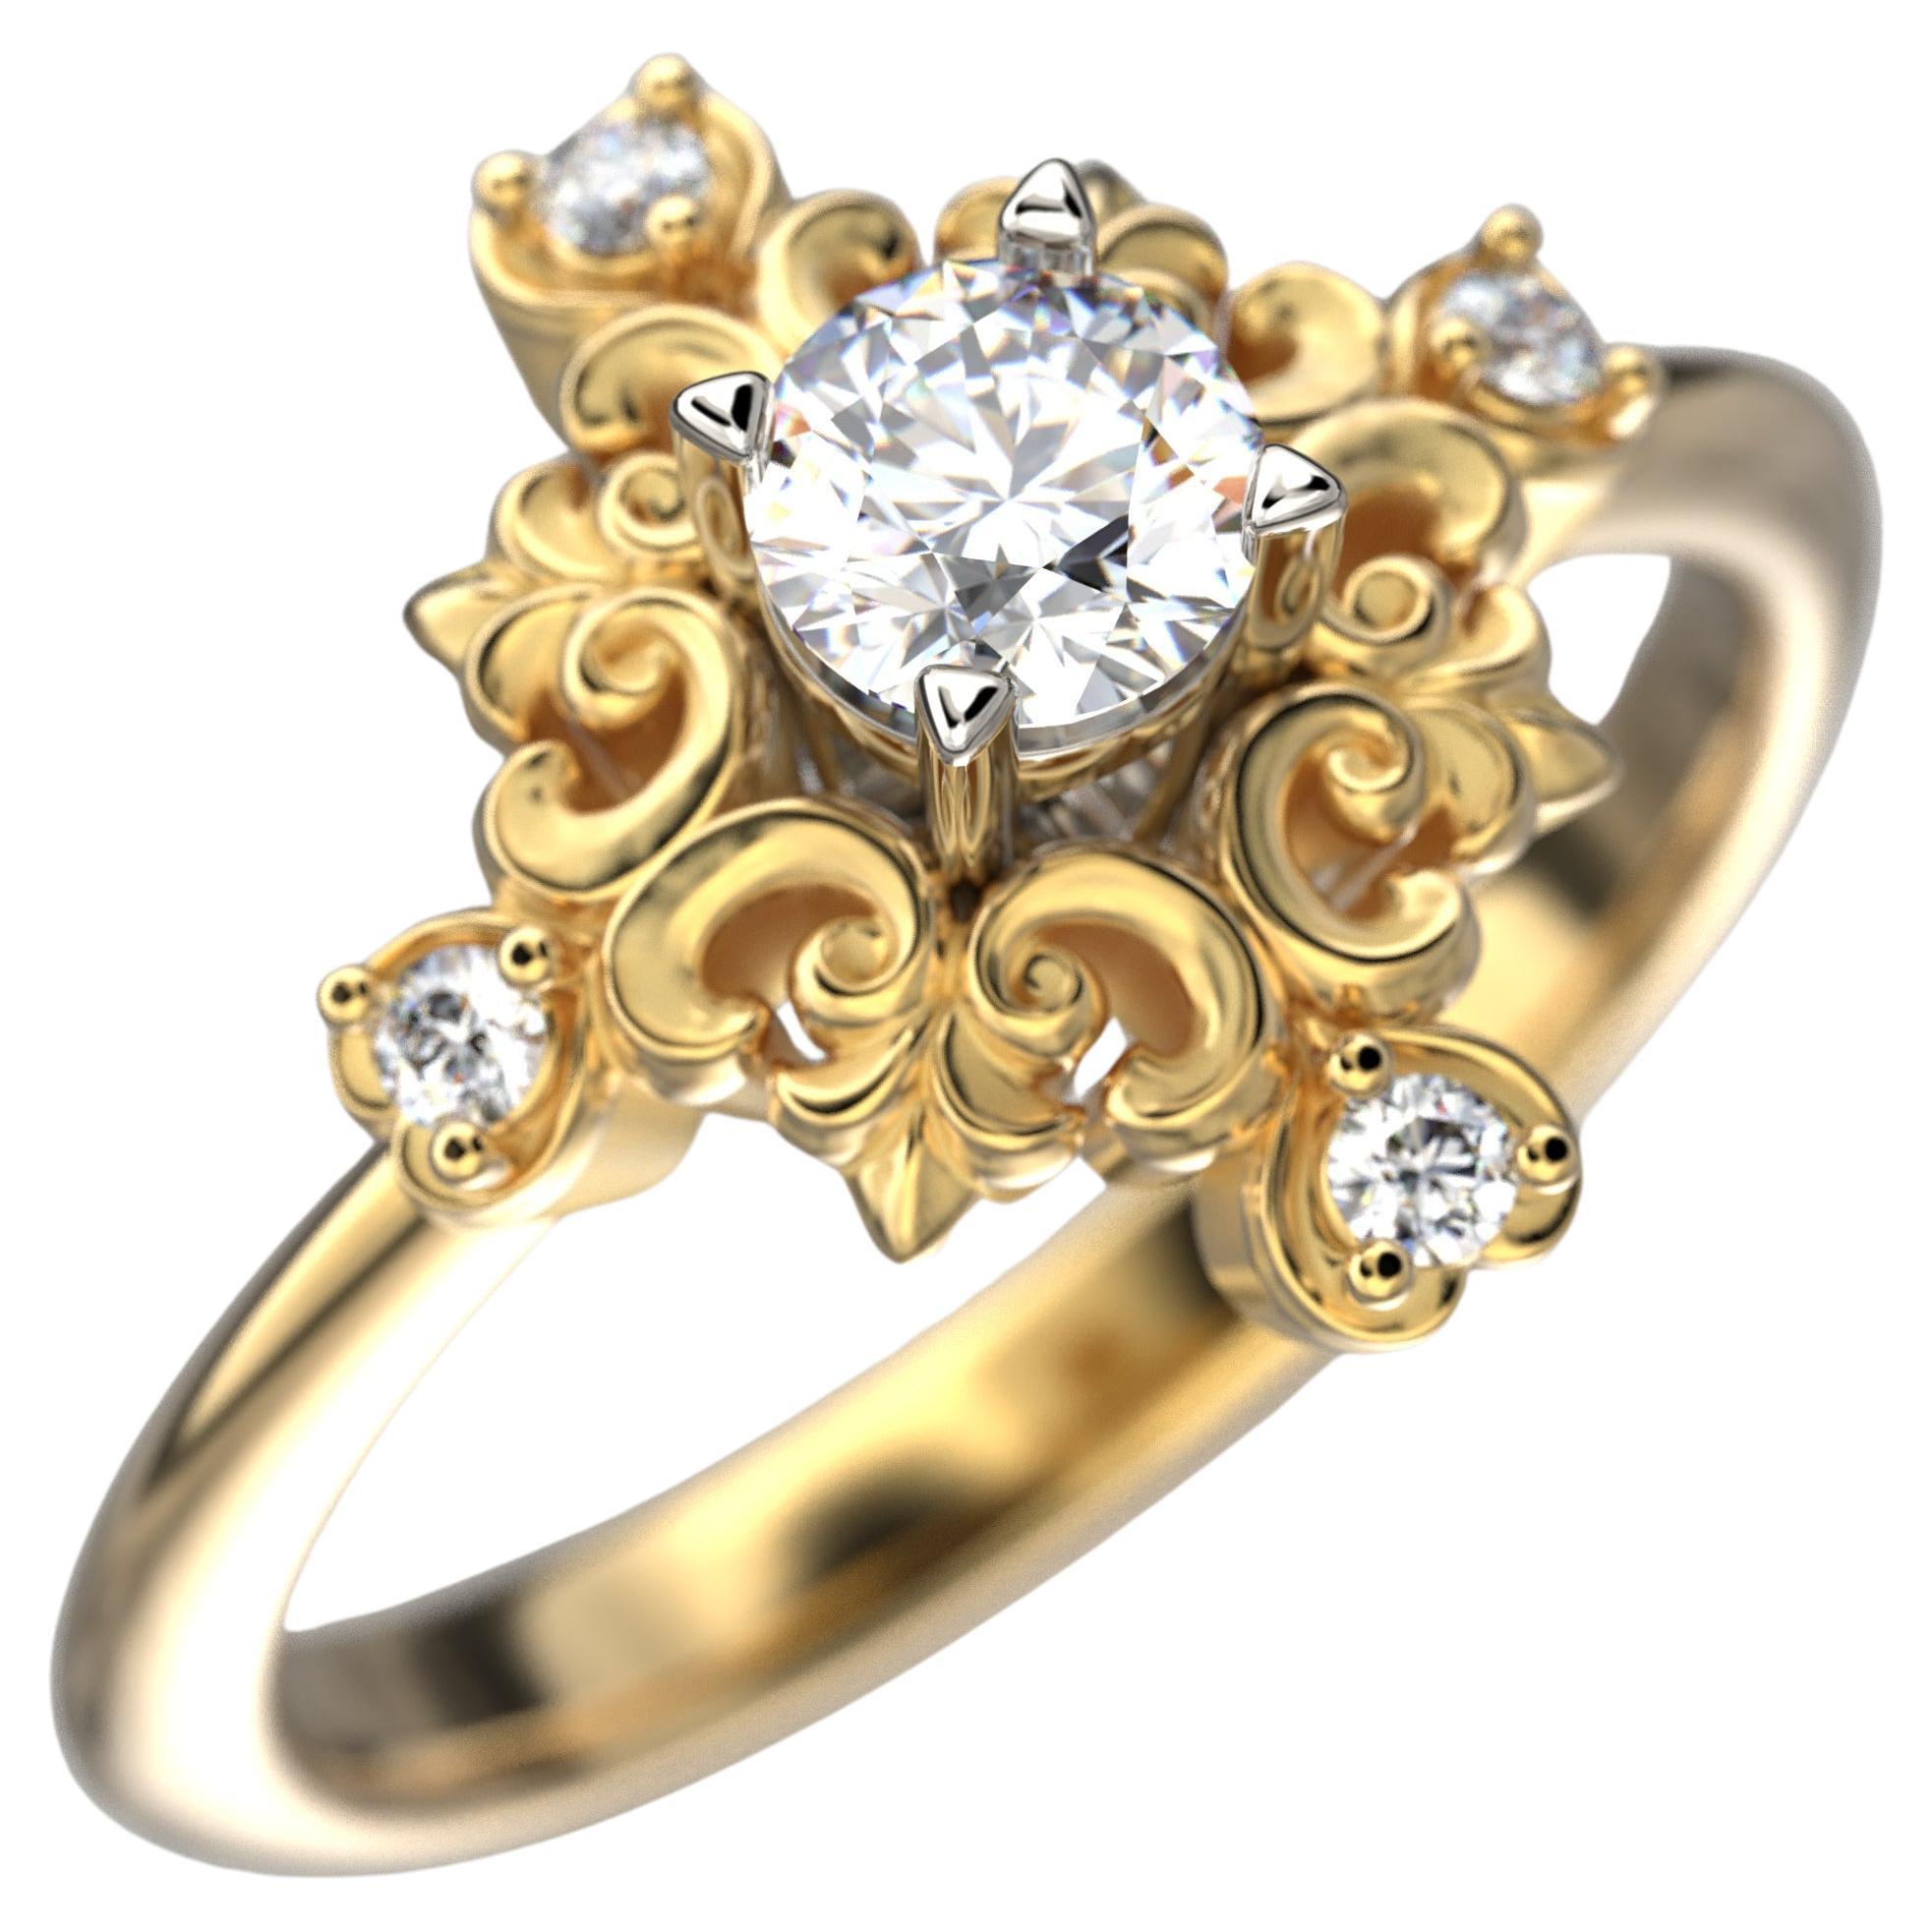 For Sale:  18k Gold Italian Diamond Engagement Ring in Baroque Style by Oltremare Gioielli